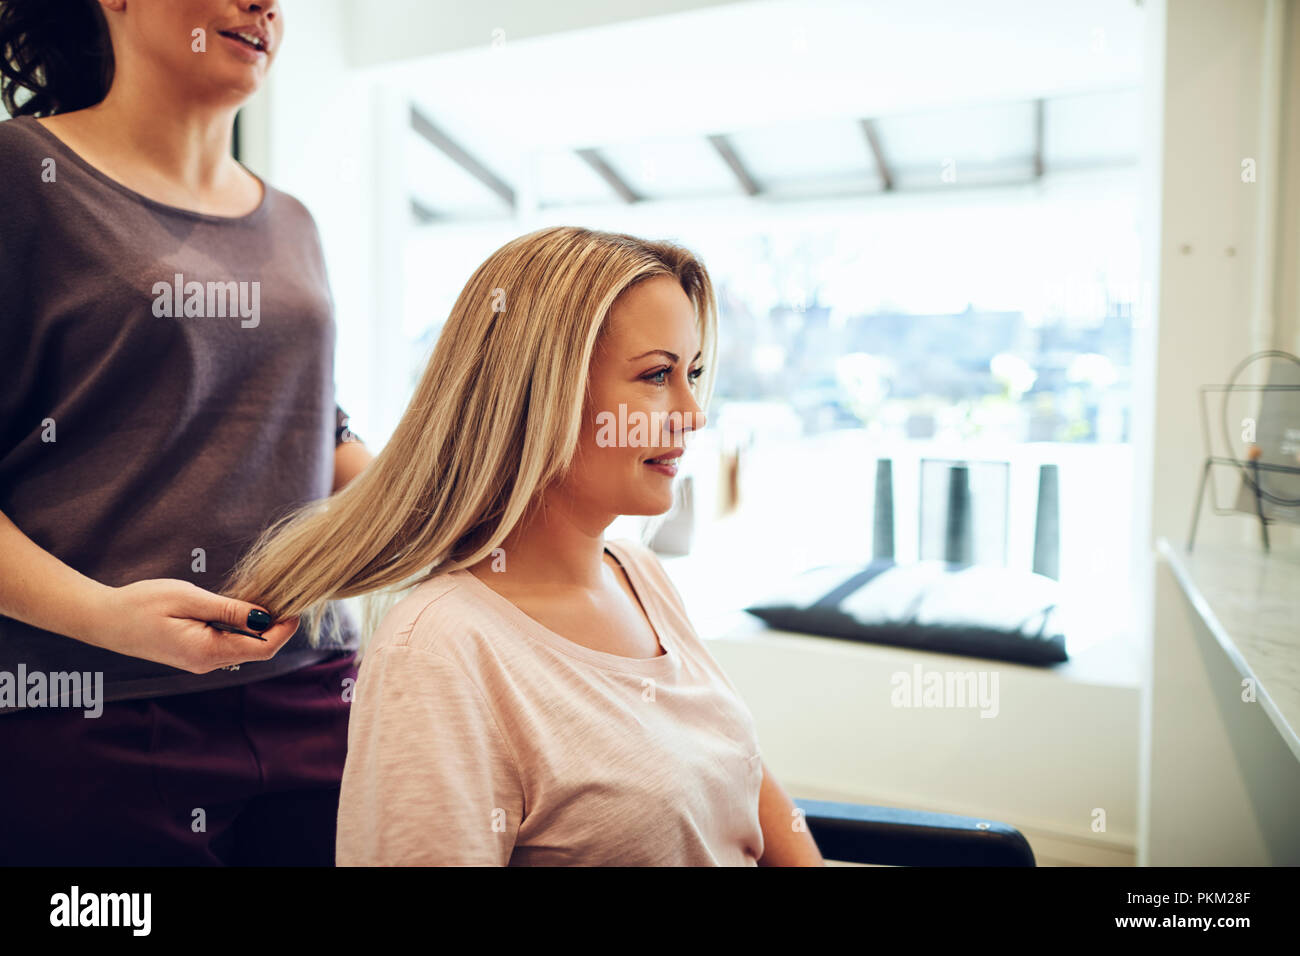 Smiling young blonde woman sitting in a salon chair having her hair done during an appointment with her hairstylist Stock Photo